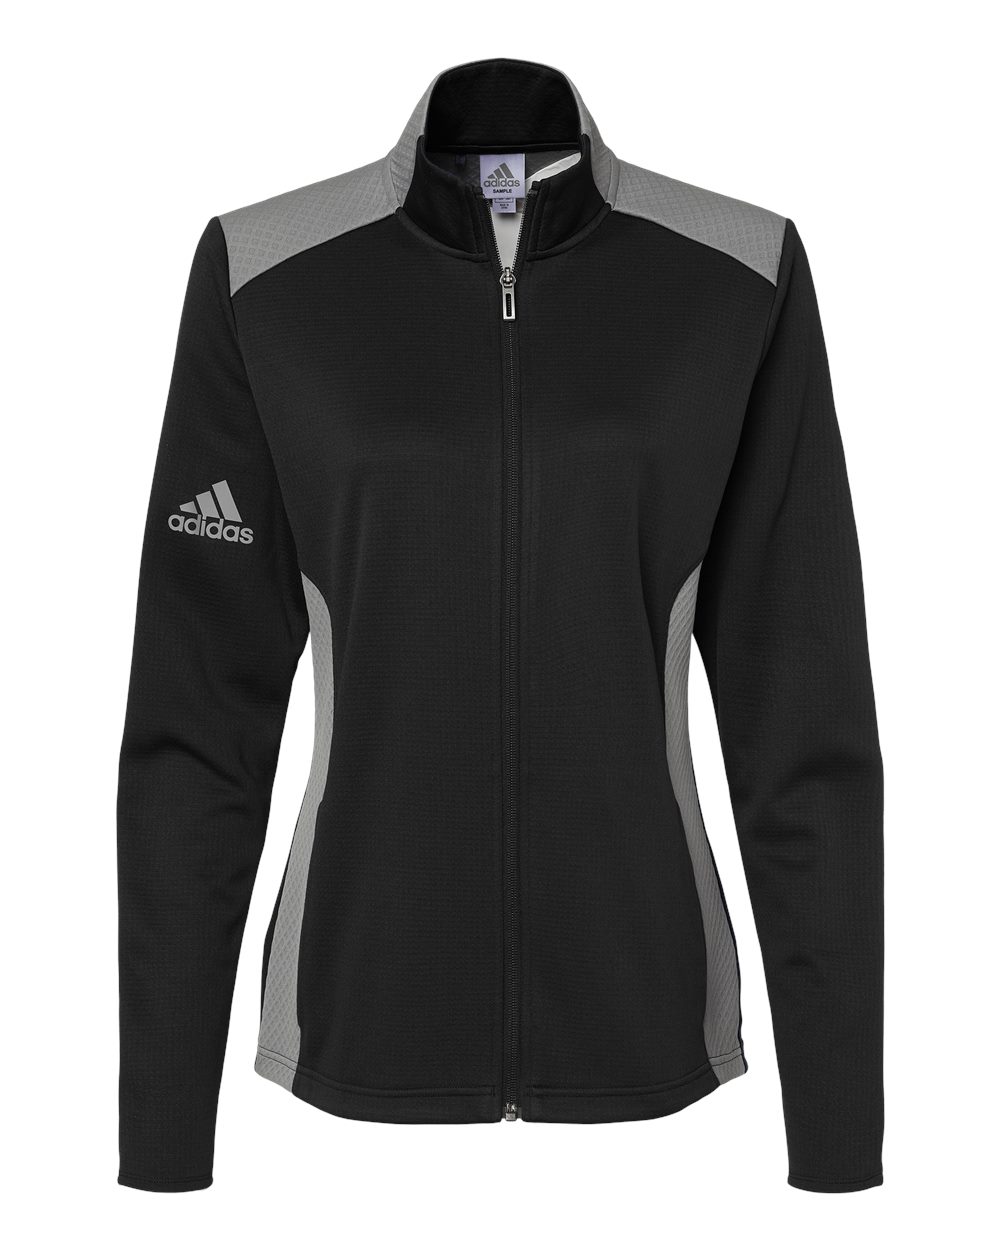 Picture of Adidas Women's Textured Mixed Media Full-Zip Jacket